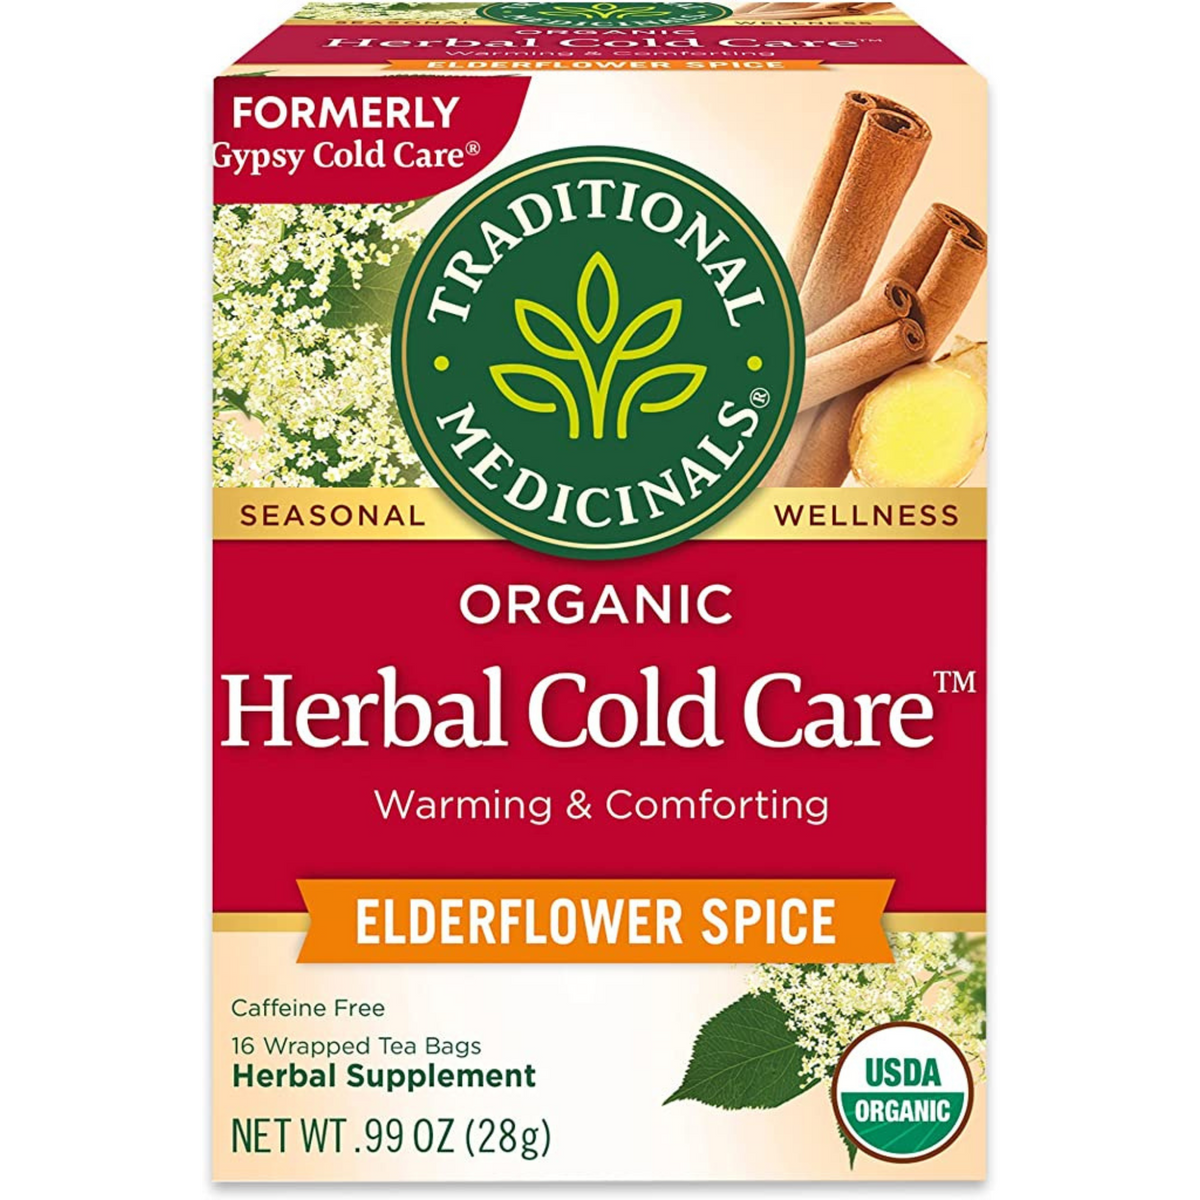 Primary Image of Herbal Cold Care